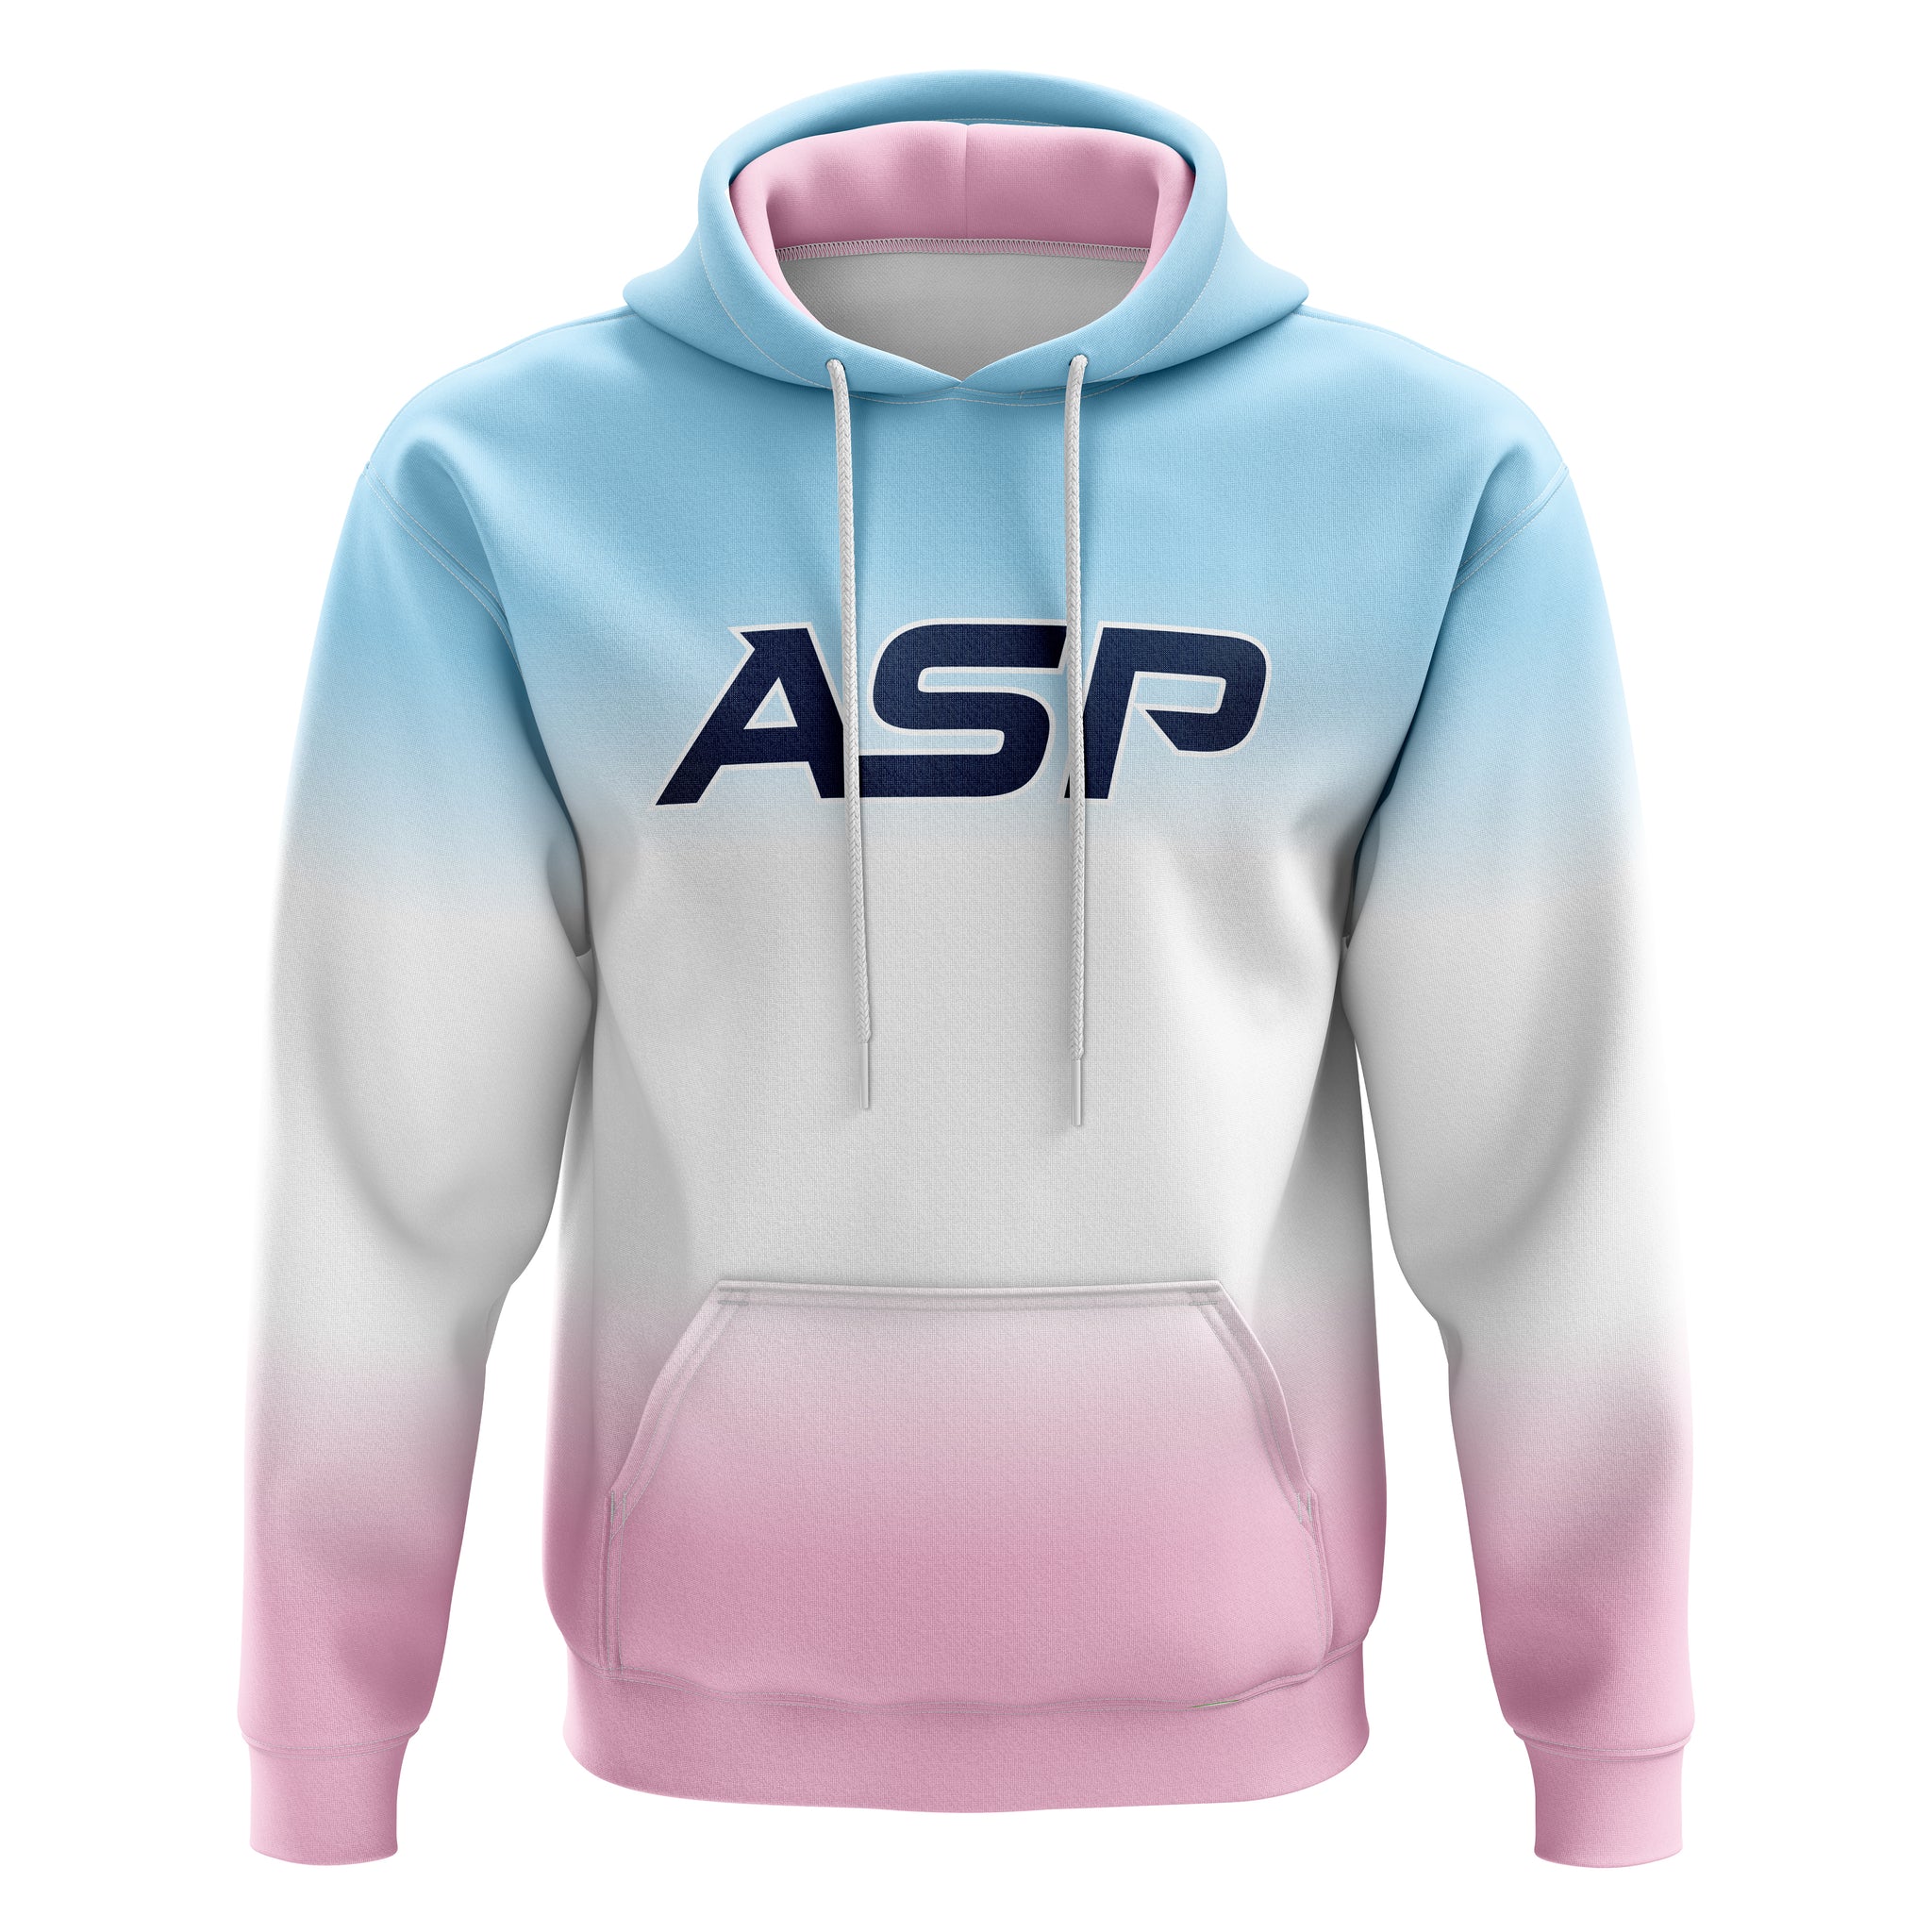 ASP Cotton Candy Hoodie